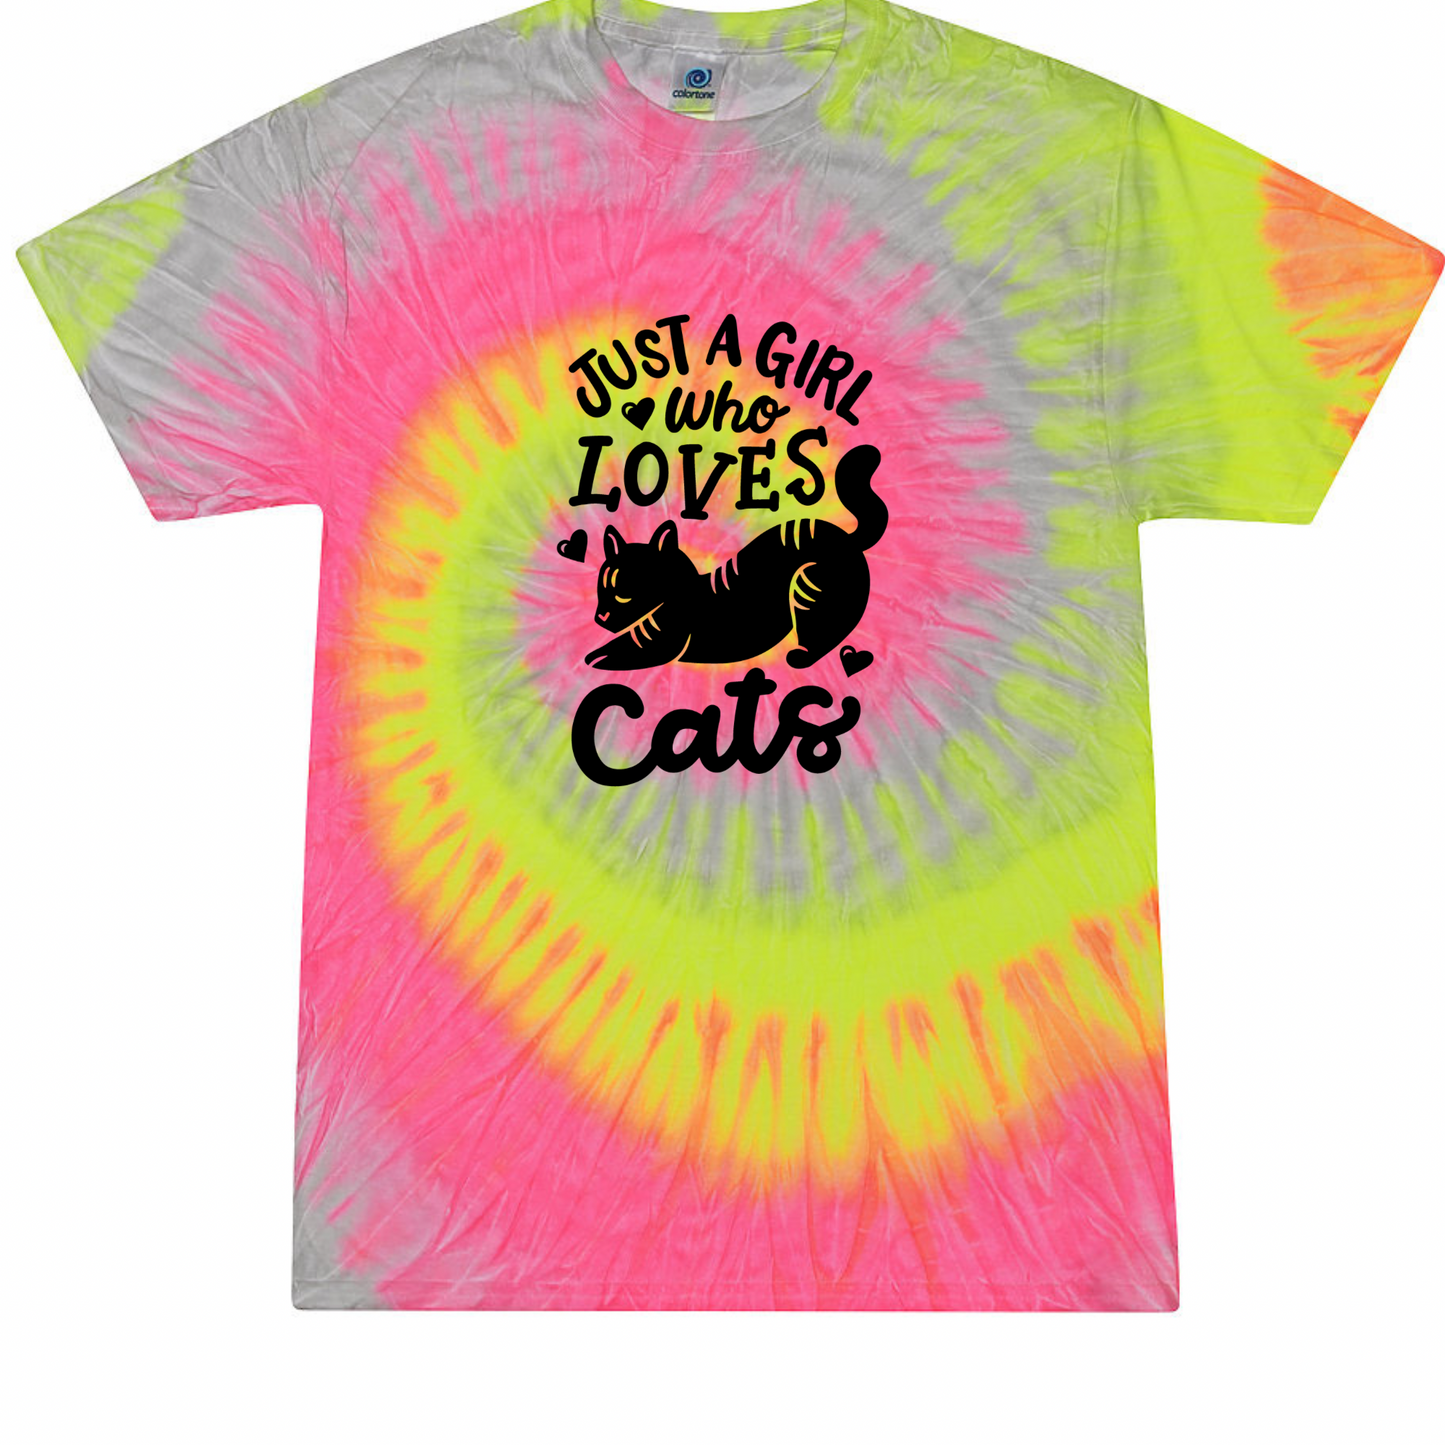 Just a girl who loves  cats  Tie Dye shirts